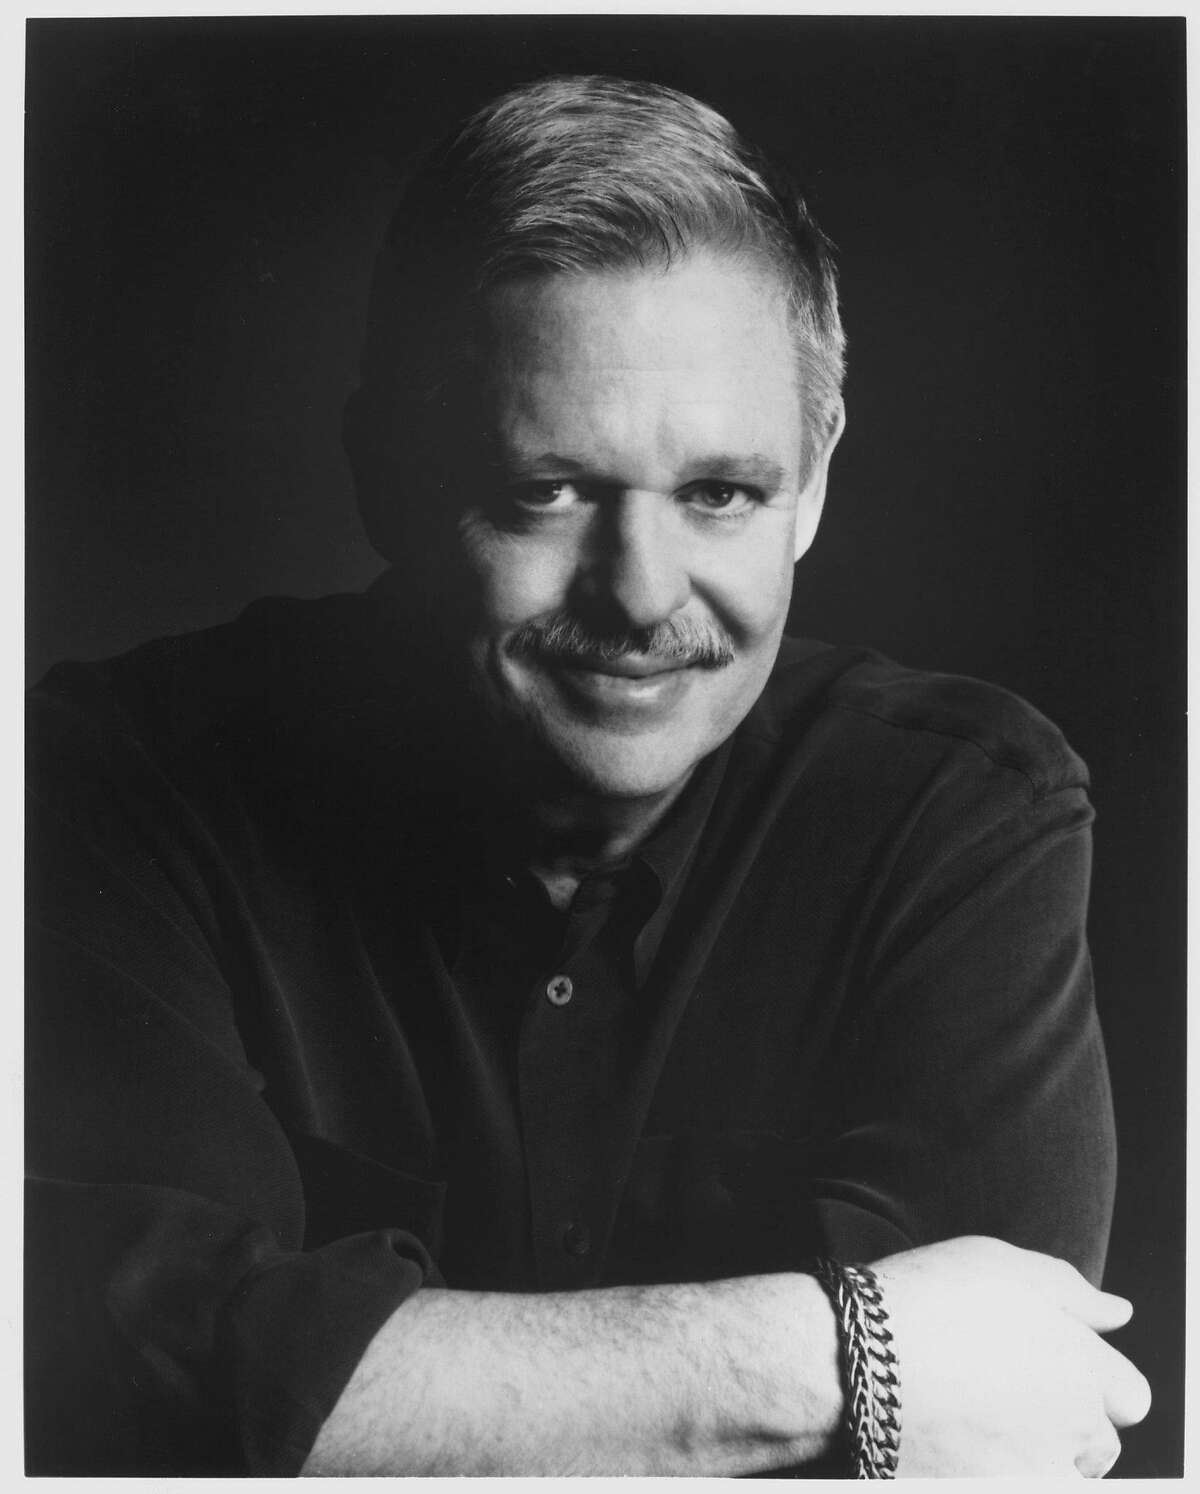 FROM 'TALES OF THE CITY' TO HIS NEWEST RELEASE, 'THE NIGHT LISTENER,' ARMISTEAD MAUPIN SHINES AT THE GRAND 1894 OPERA HOUSE ON GALVESTON ISLAND FRIDAY, OCTOBER 13